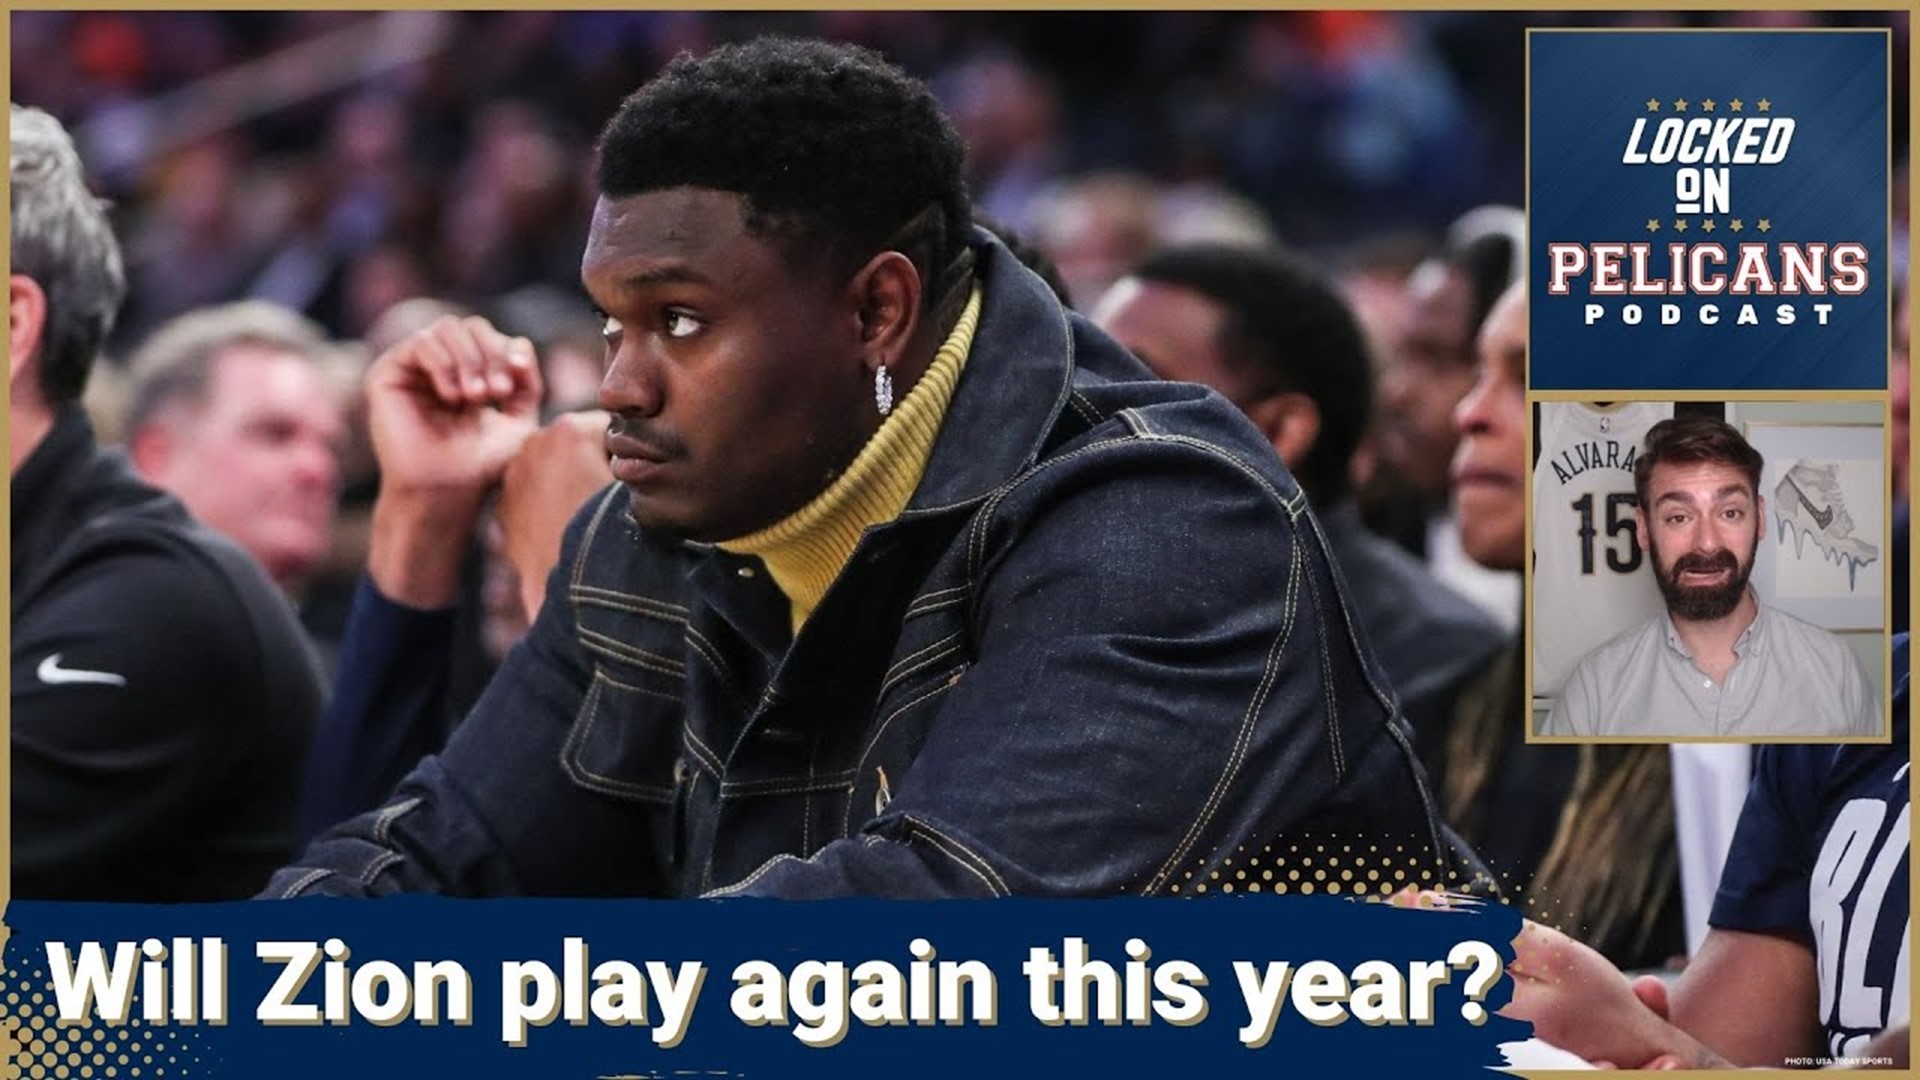 Zion Williamson has missed more games than he's played for the New Orleans Pelicans. Jake Madison gives you the latest injury update from the Pels